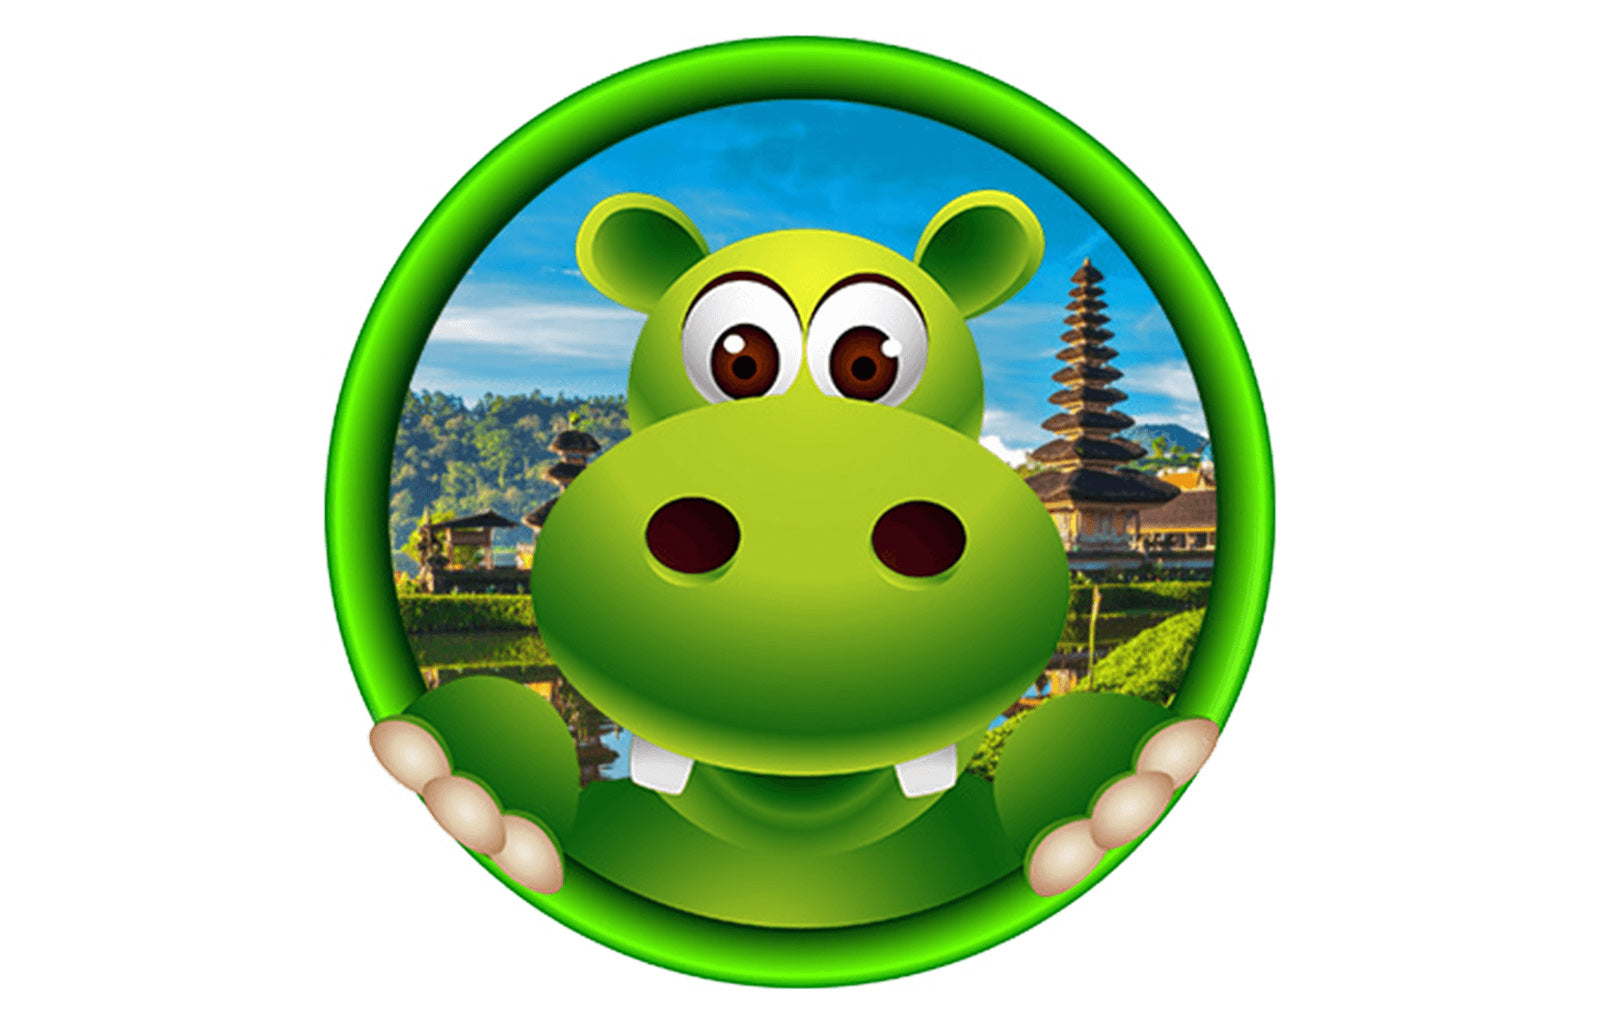 Featured Image of Puddles the Hippo character representing the Happy Hippo Product Green Bali Kratom Powder (Top-Shelf Bali)